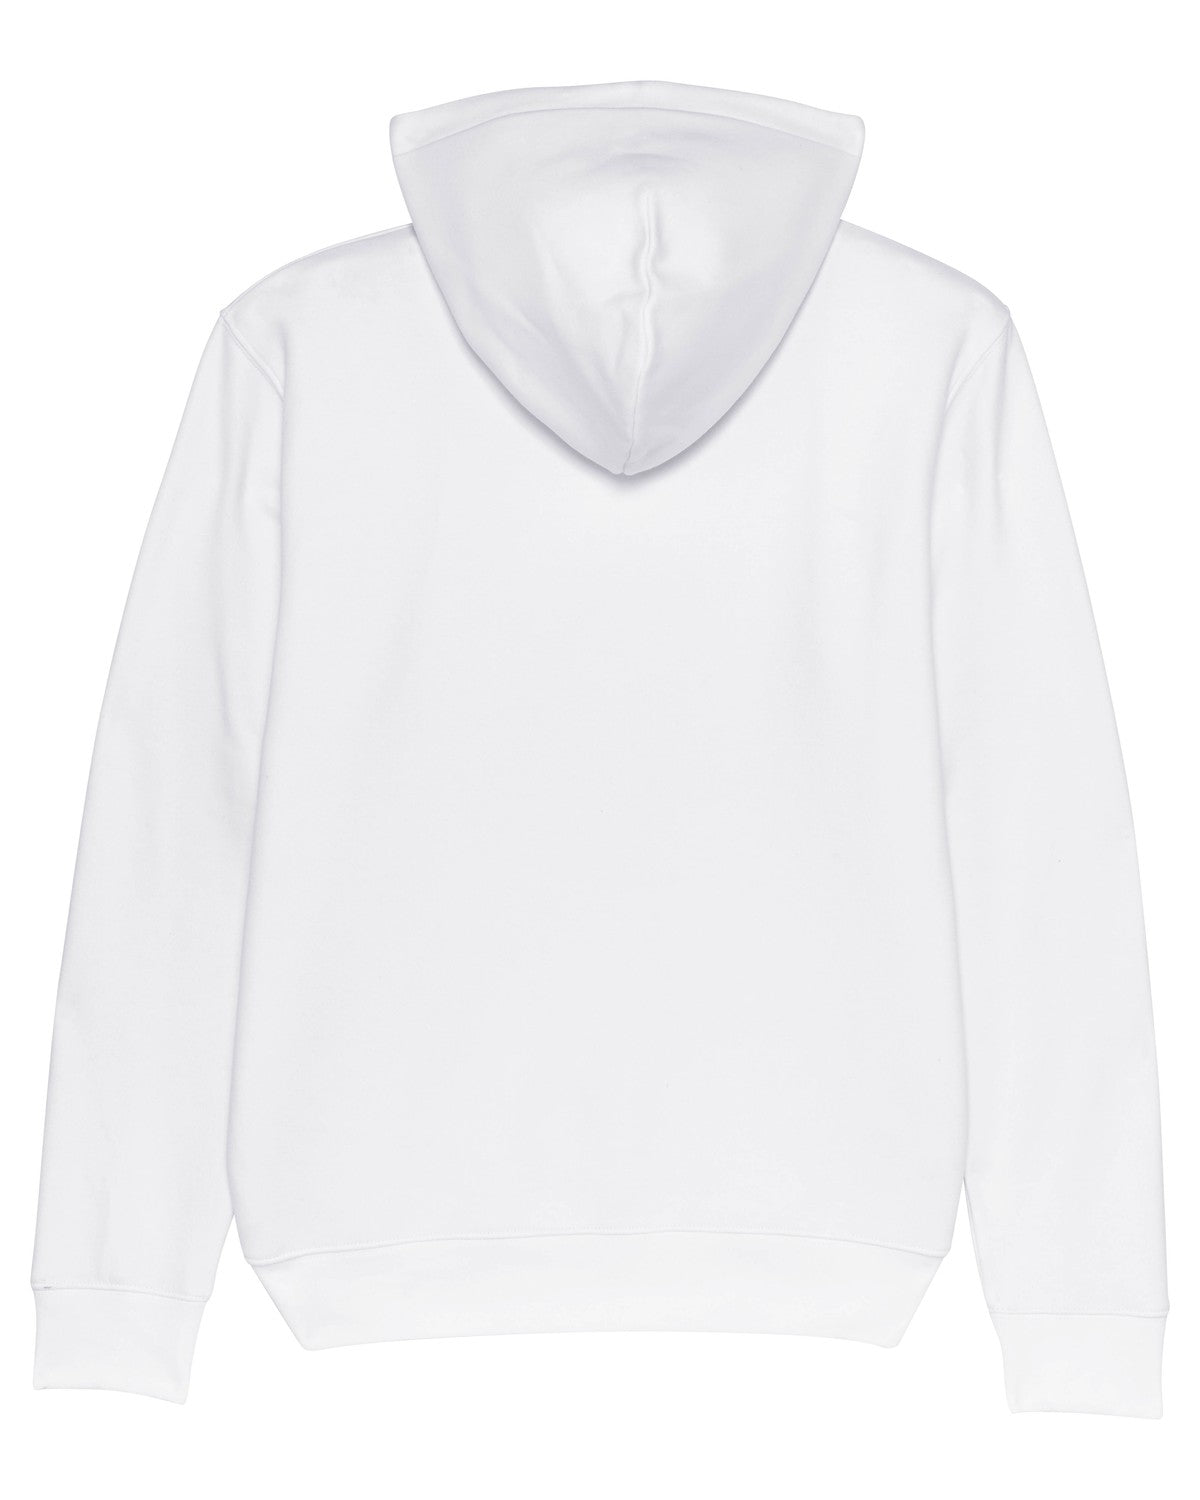 Hoodie Kanye Beautiful mother day White